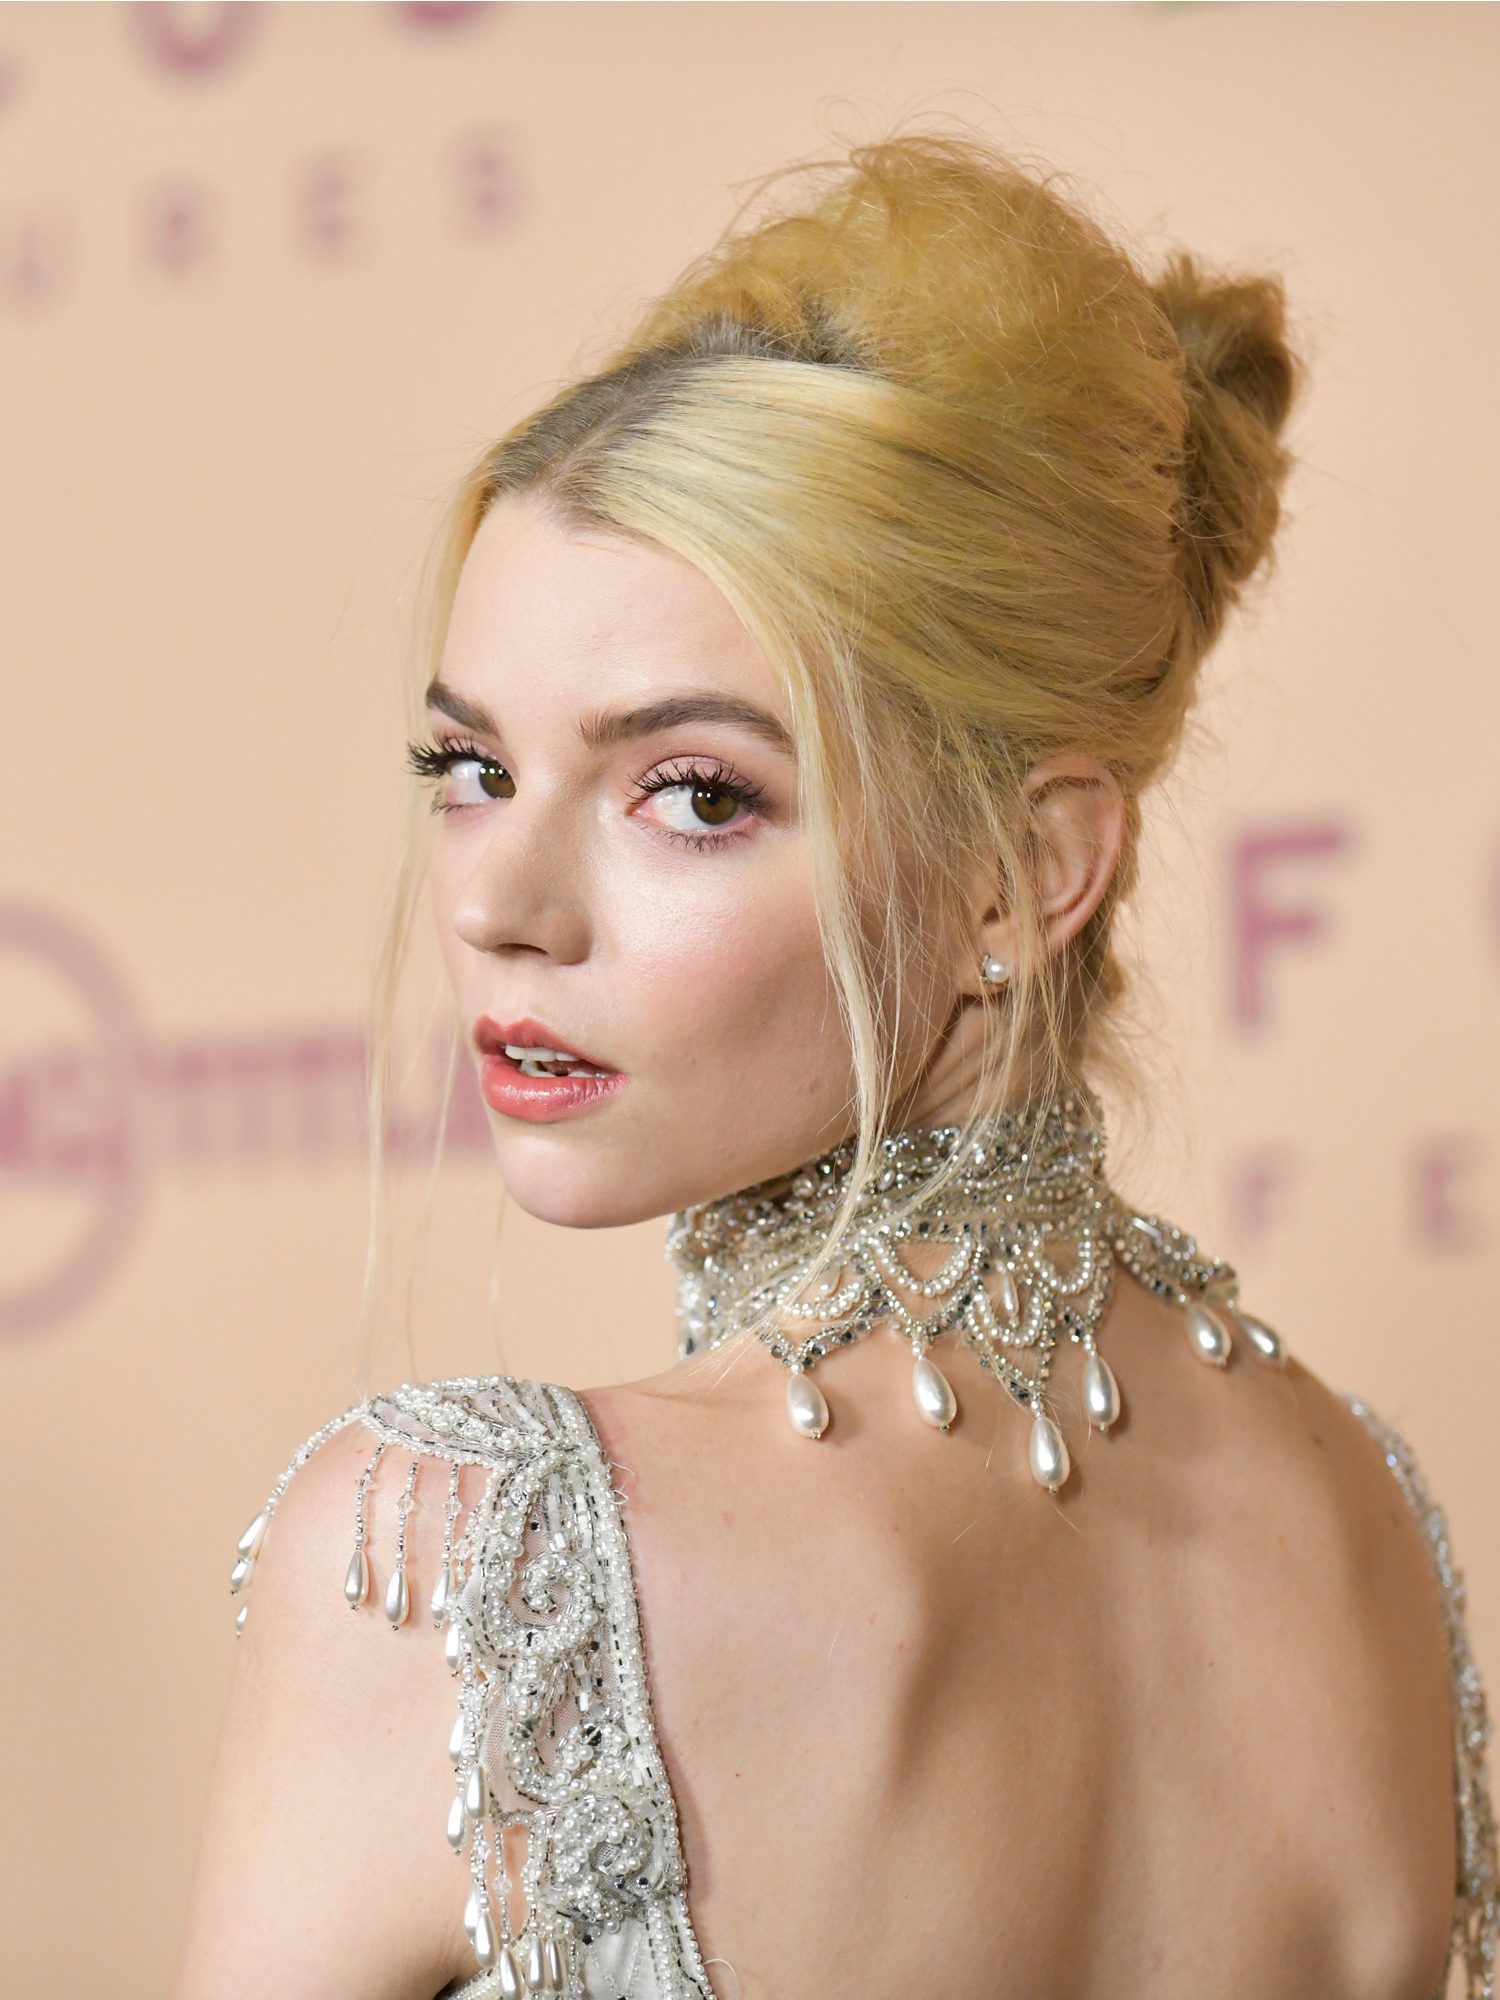 Who Plays Beth Harmon on 'The Queen's Gambit'? Actress Anya Taylor-Joy Is a  Scream Queen